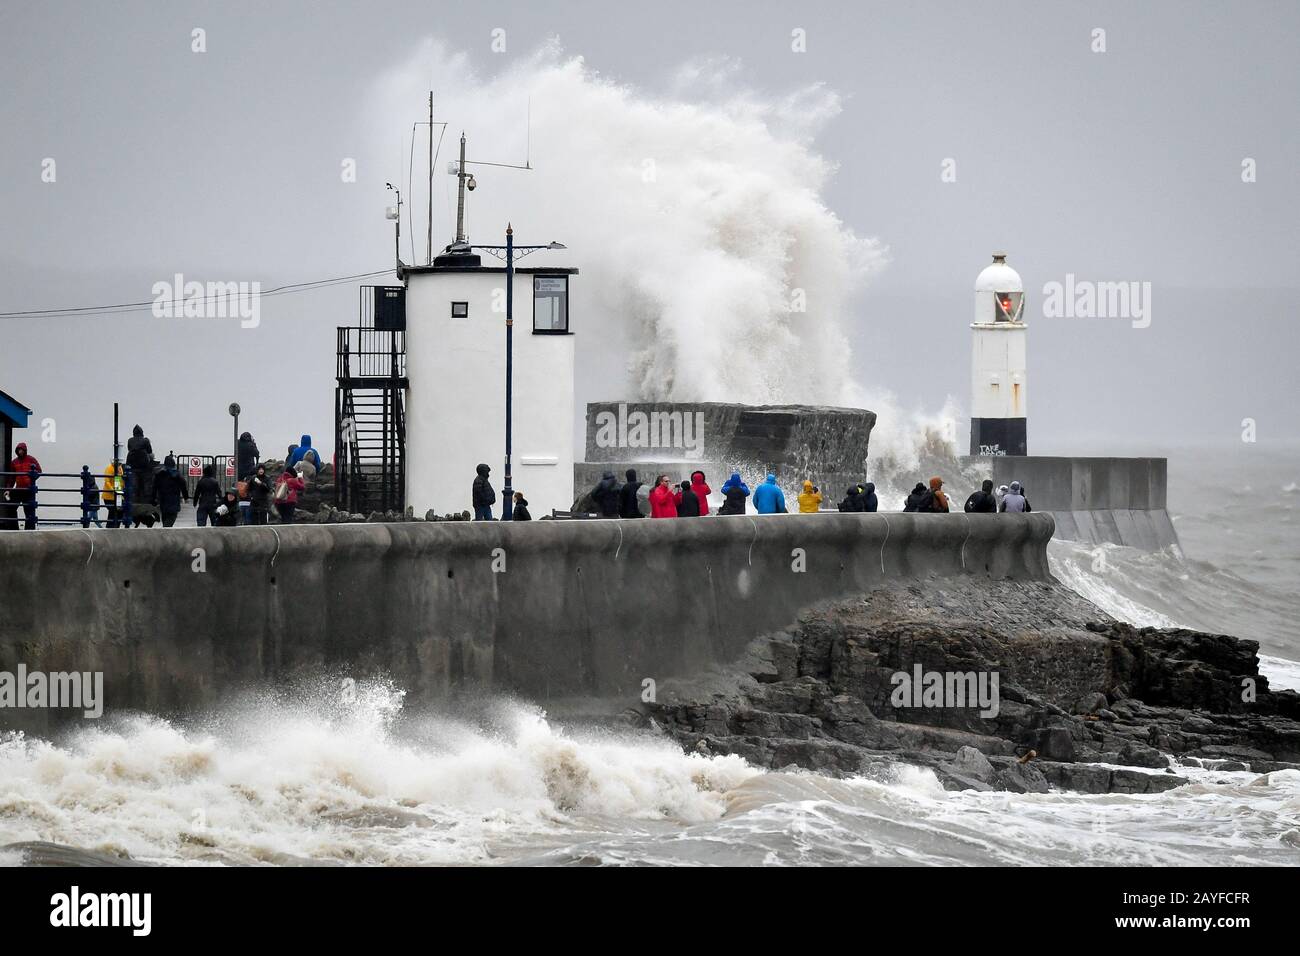 People watch waves and rough seas pound against the harbour wall at Porthcawl, Wales, as the UK is braced for widespread weather disruption for the second weekend in a row as Storm Dennis sweeps in. Stock Photo